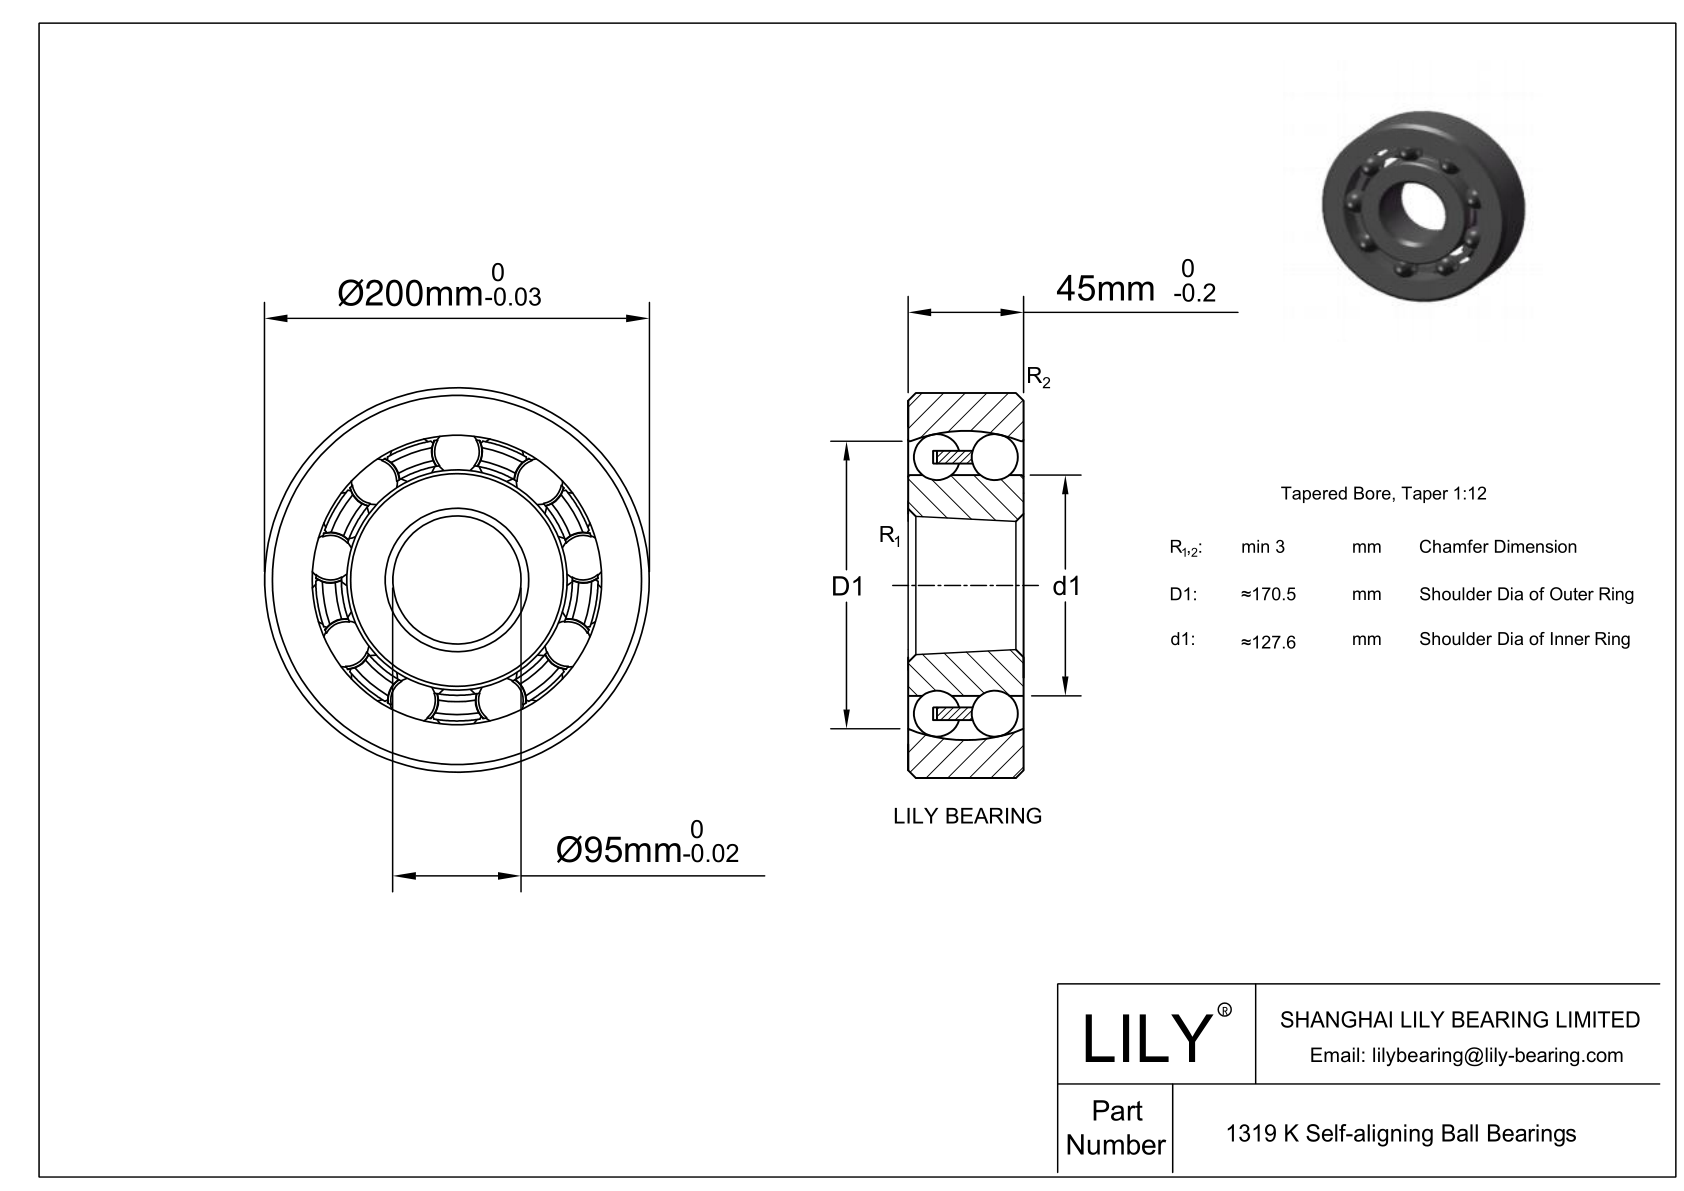 S1319 K Stainless Steel Self Aligning Ball Bearings cad drawing